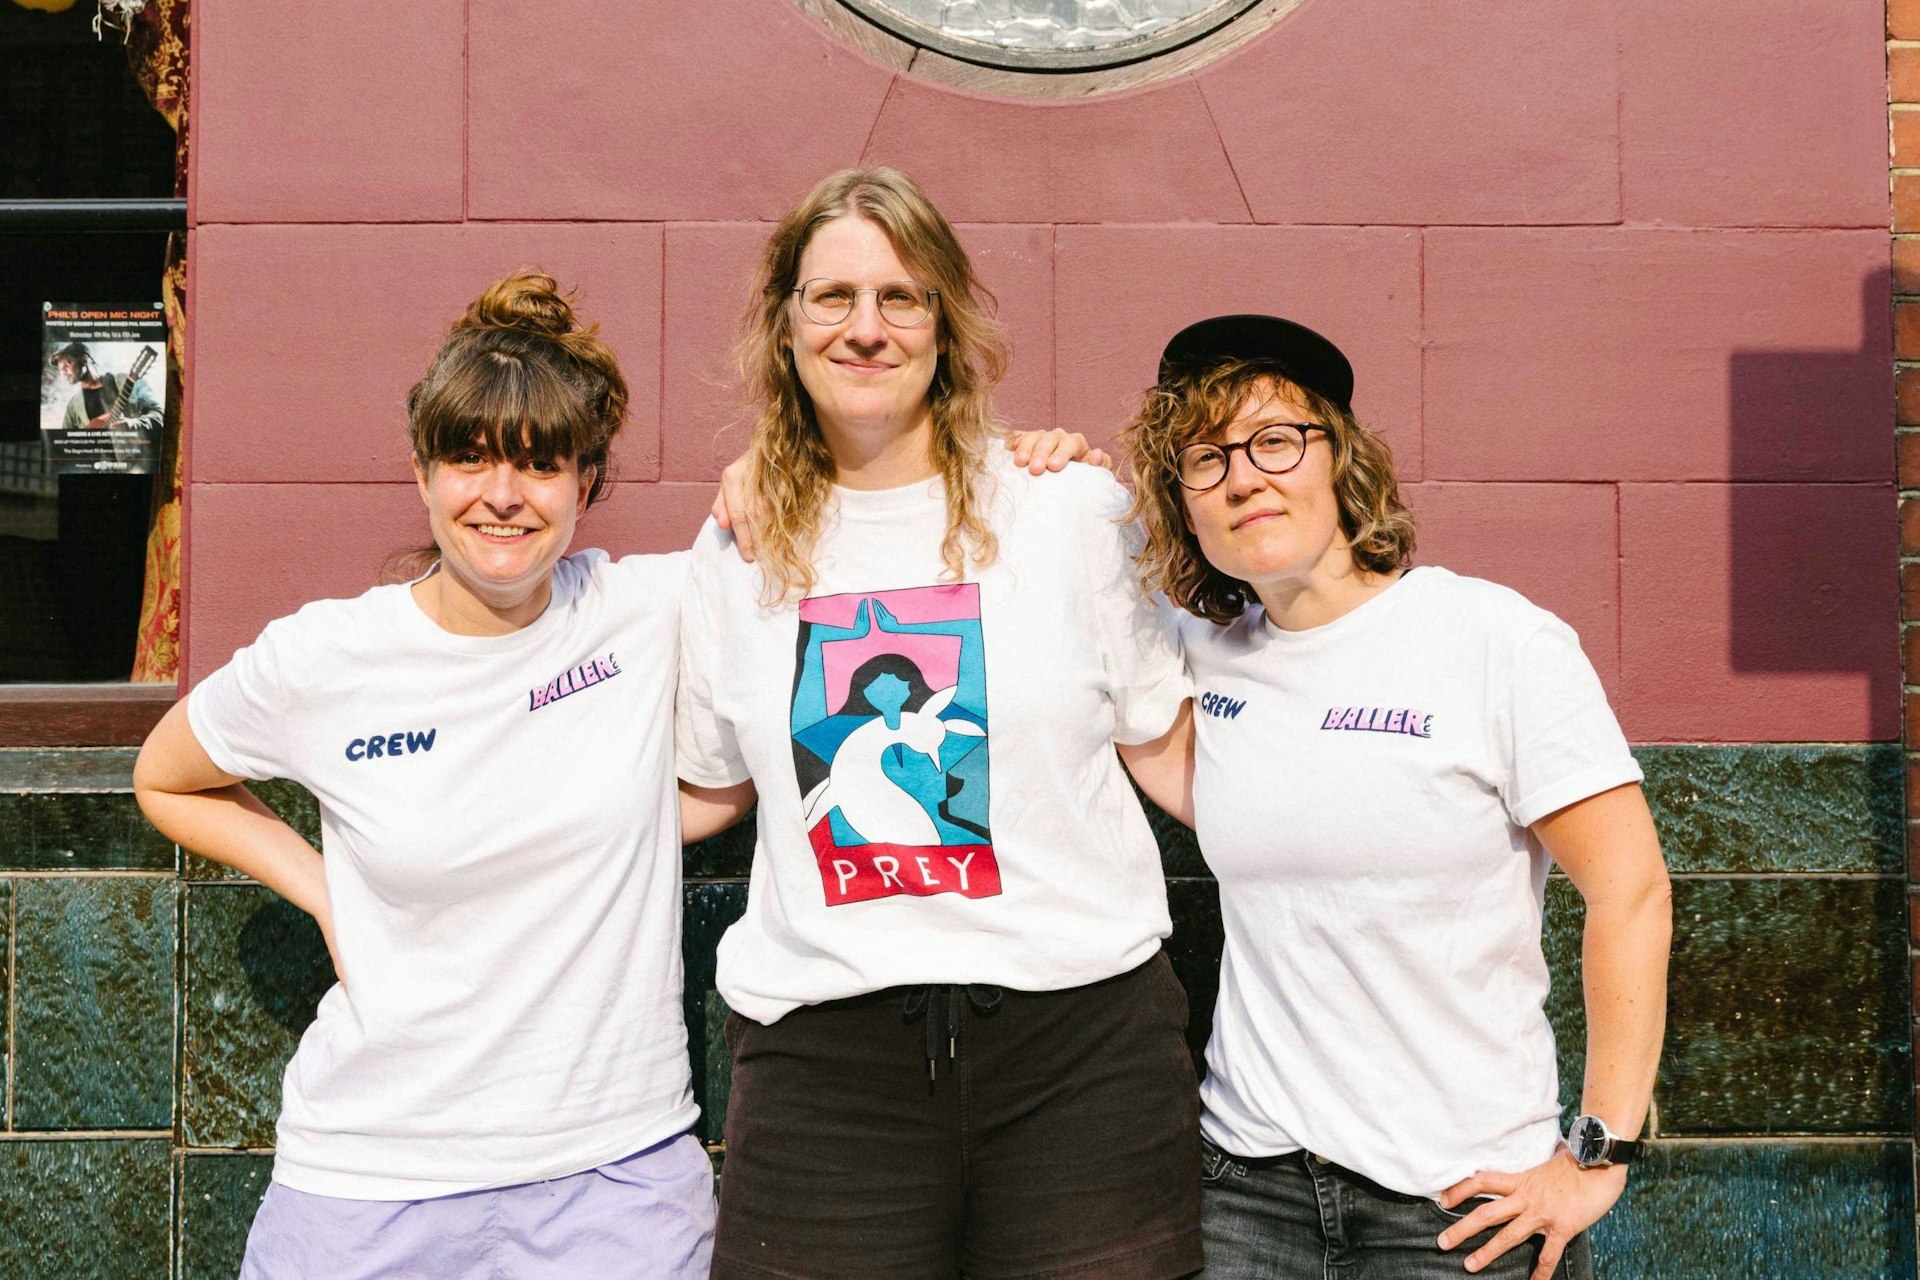 The DIY group carving out space for women’s football